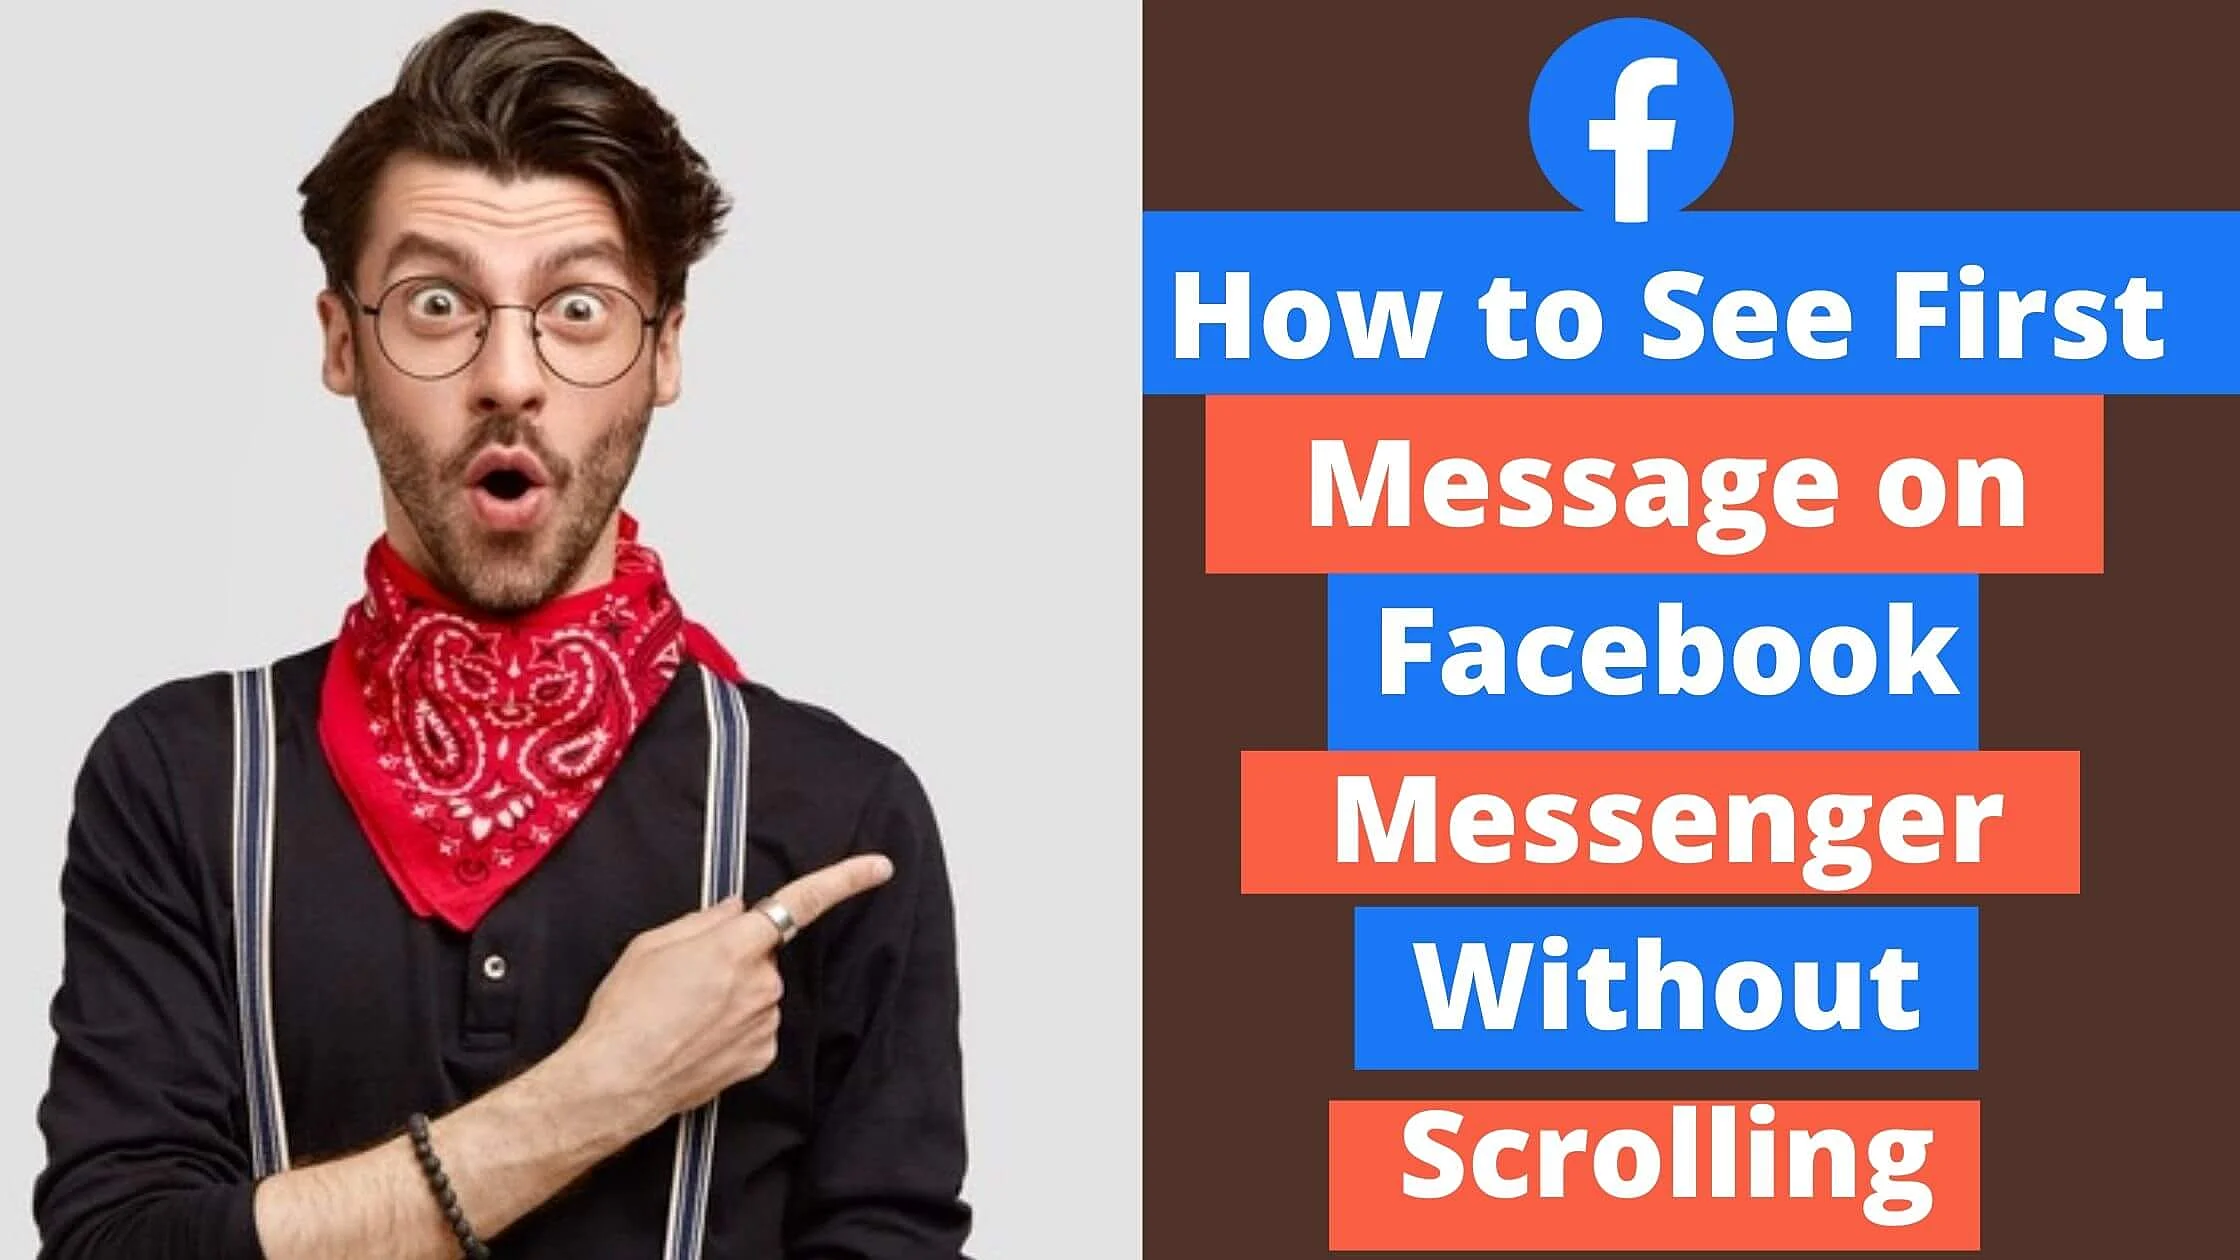 How to See First Message on Facebook Messenger Without Scrolling